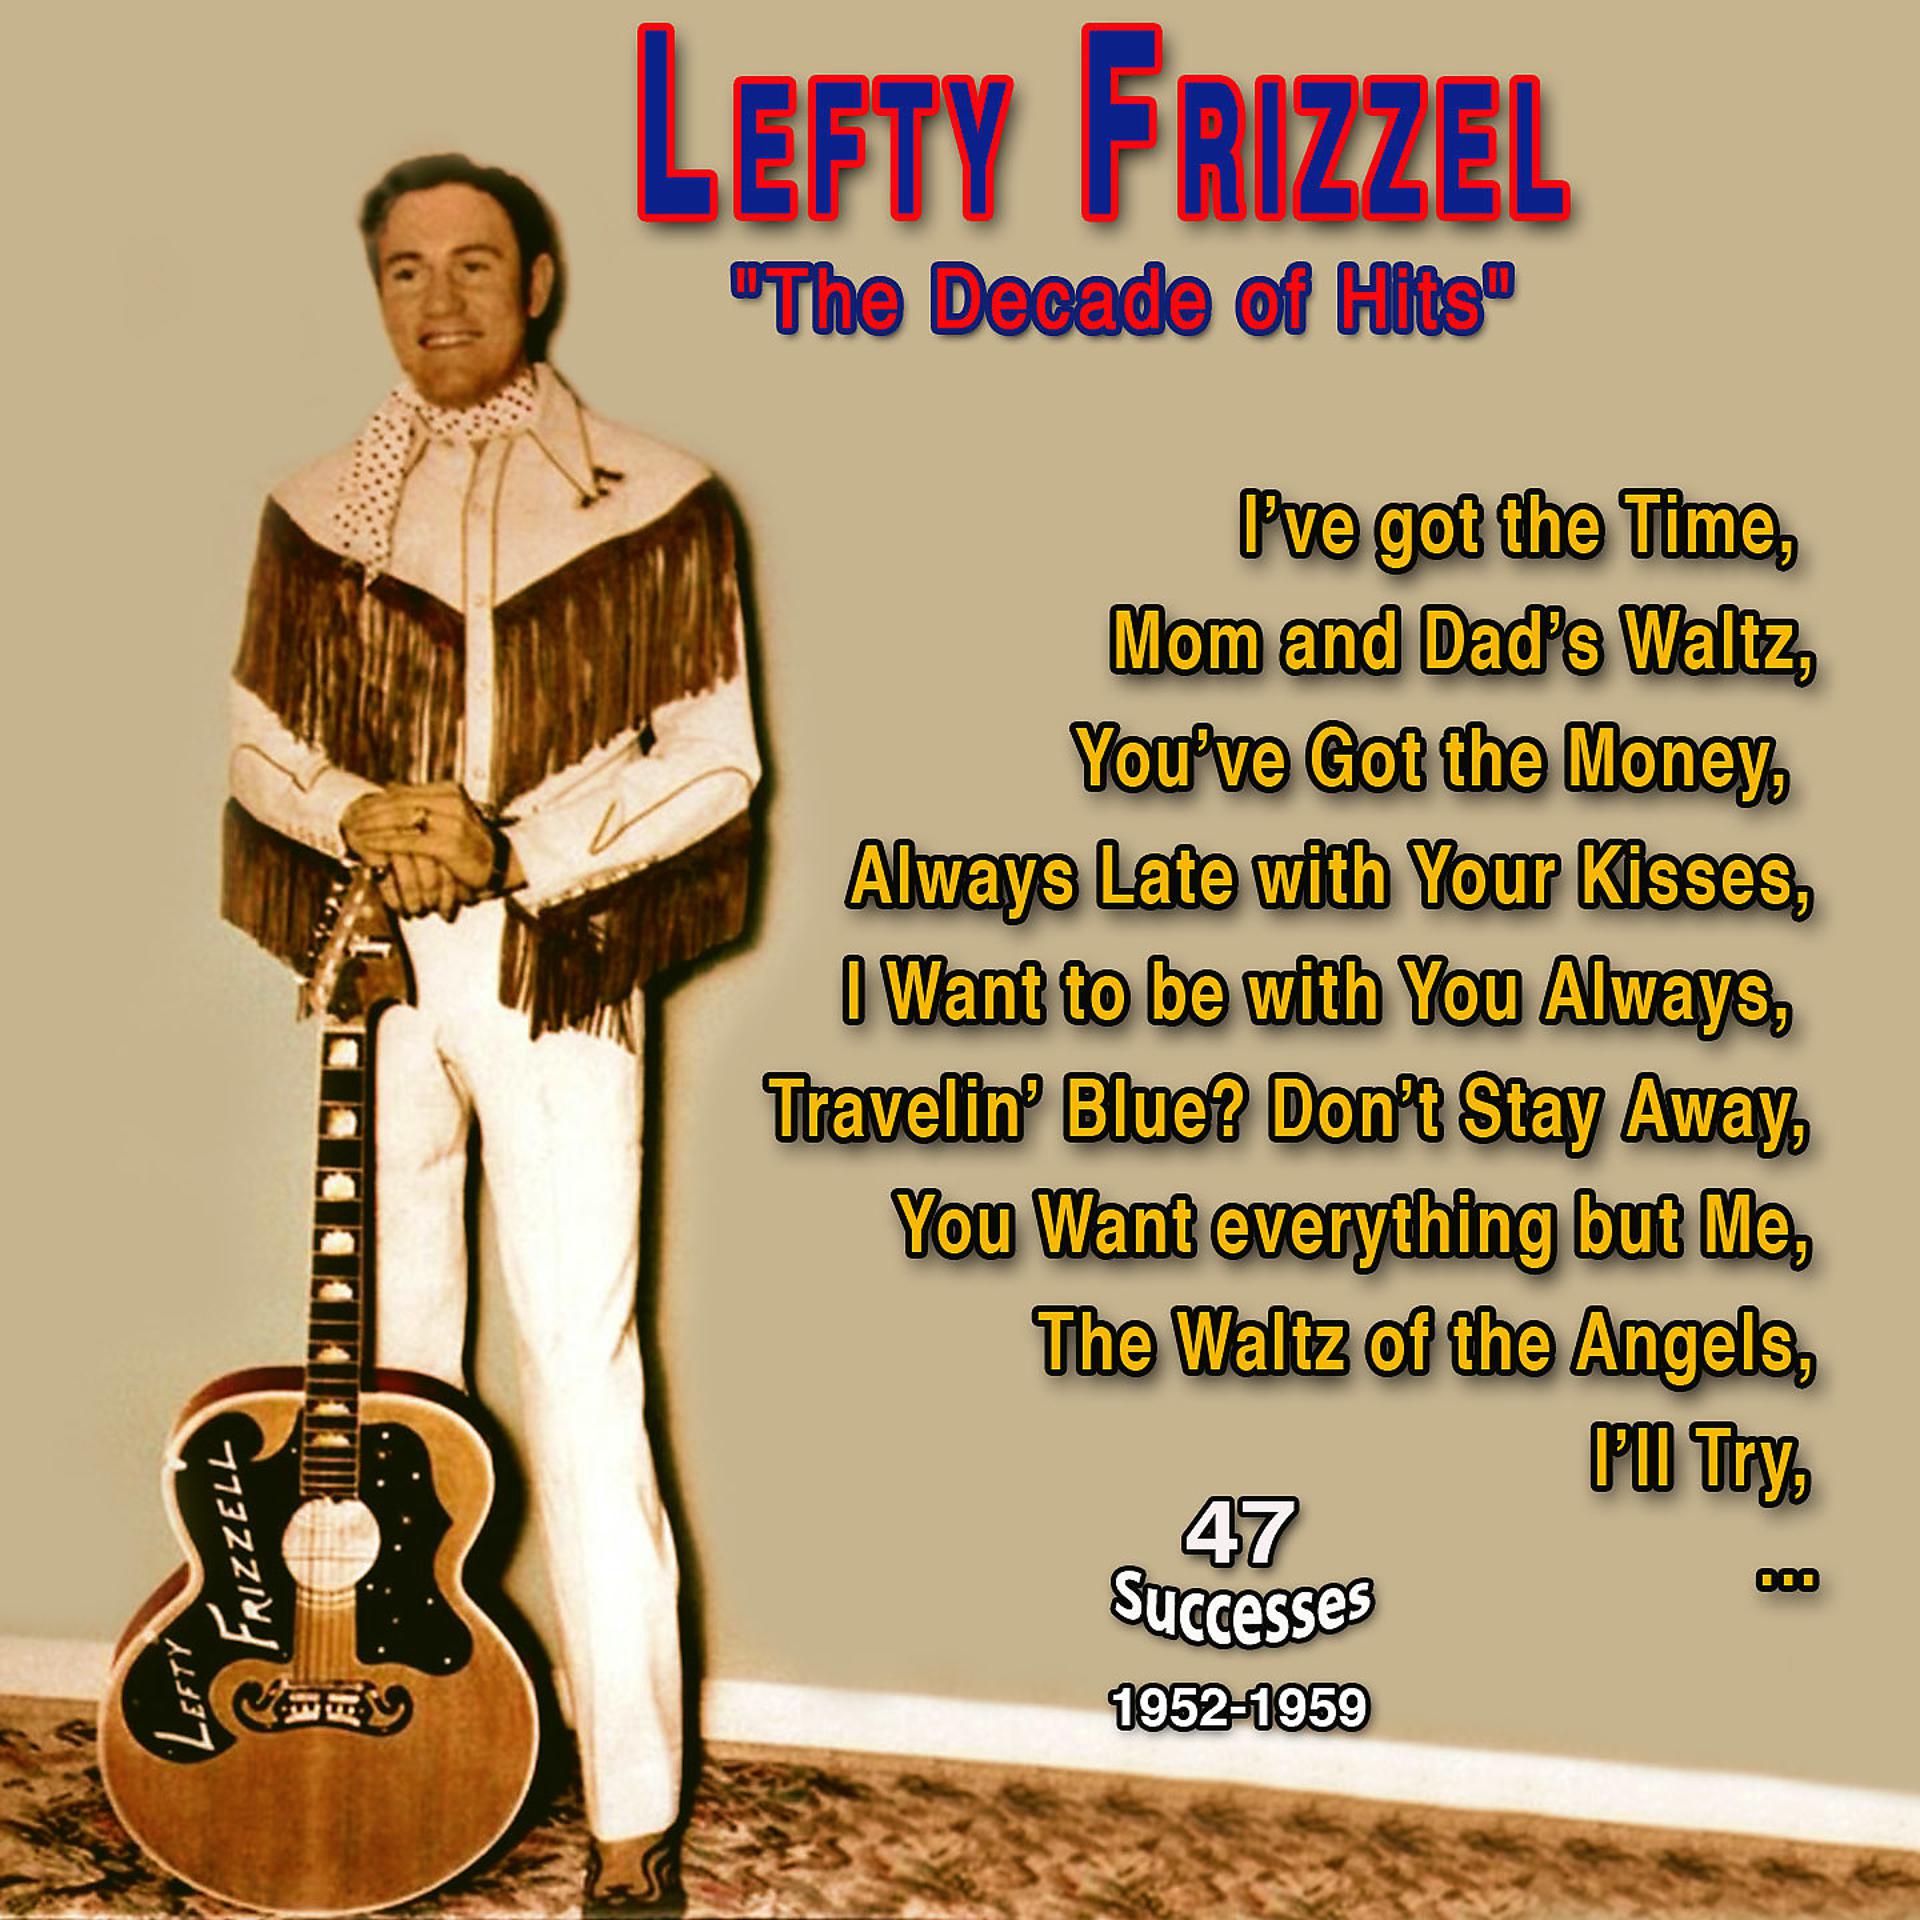 Постер альбома "The Decade of Hits" Lefty Frizzel